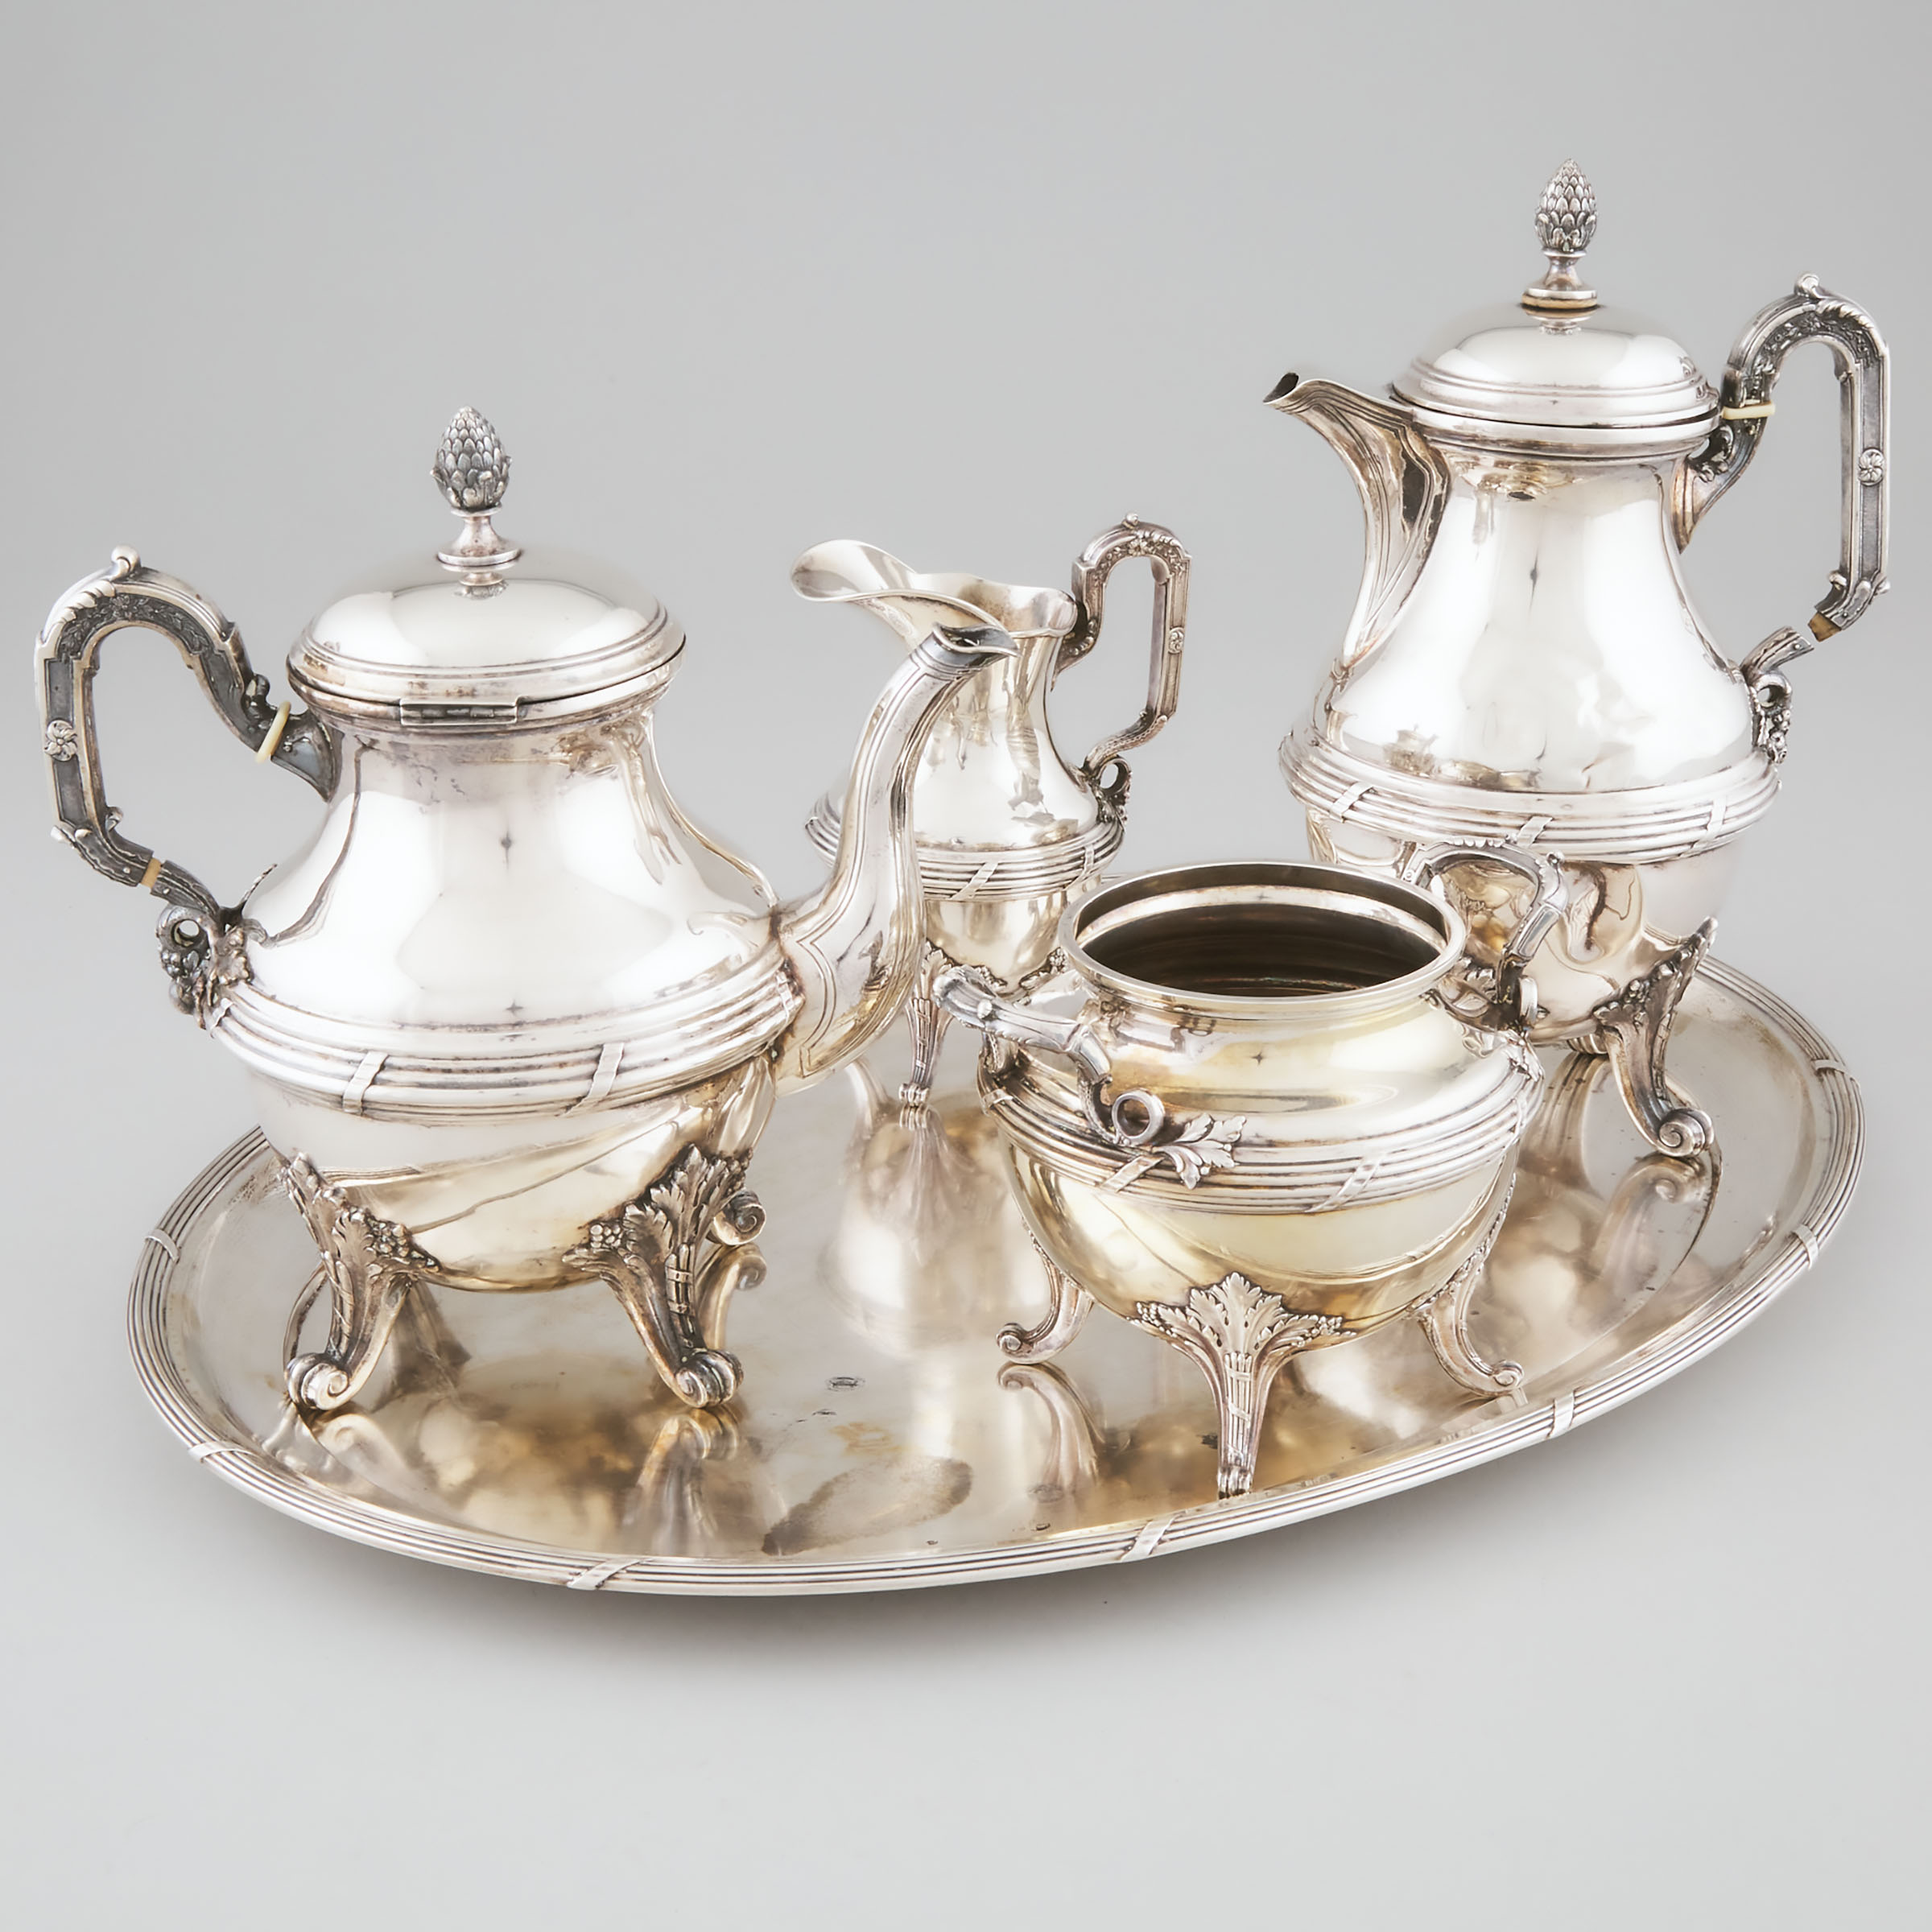 German Silver Tea and Coffee Service  2a5611